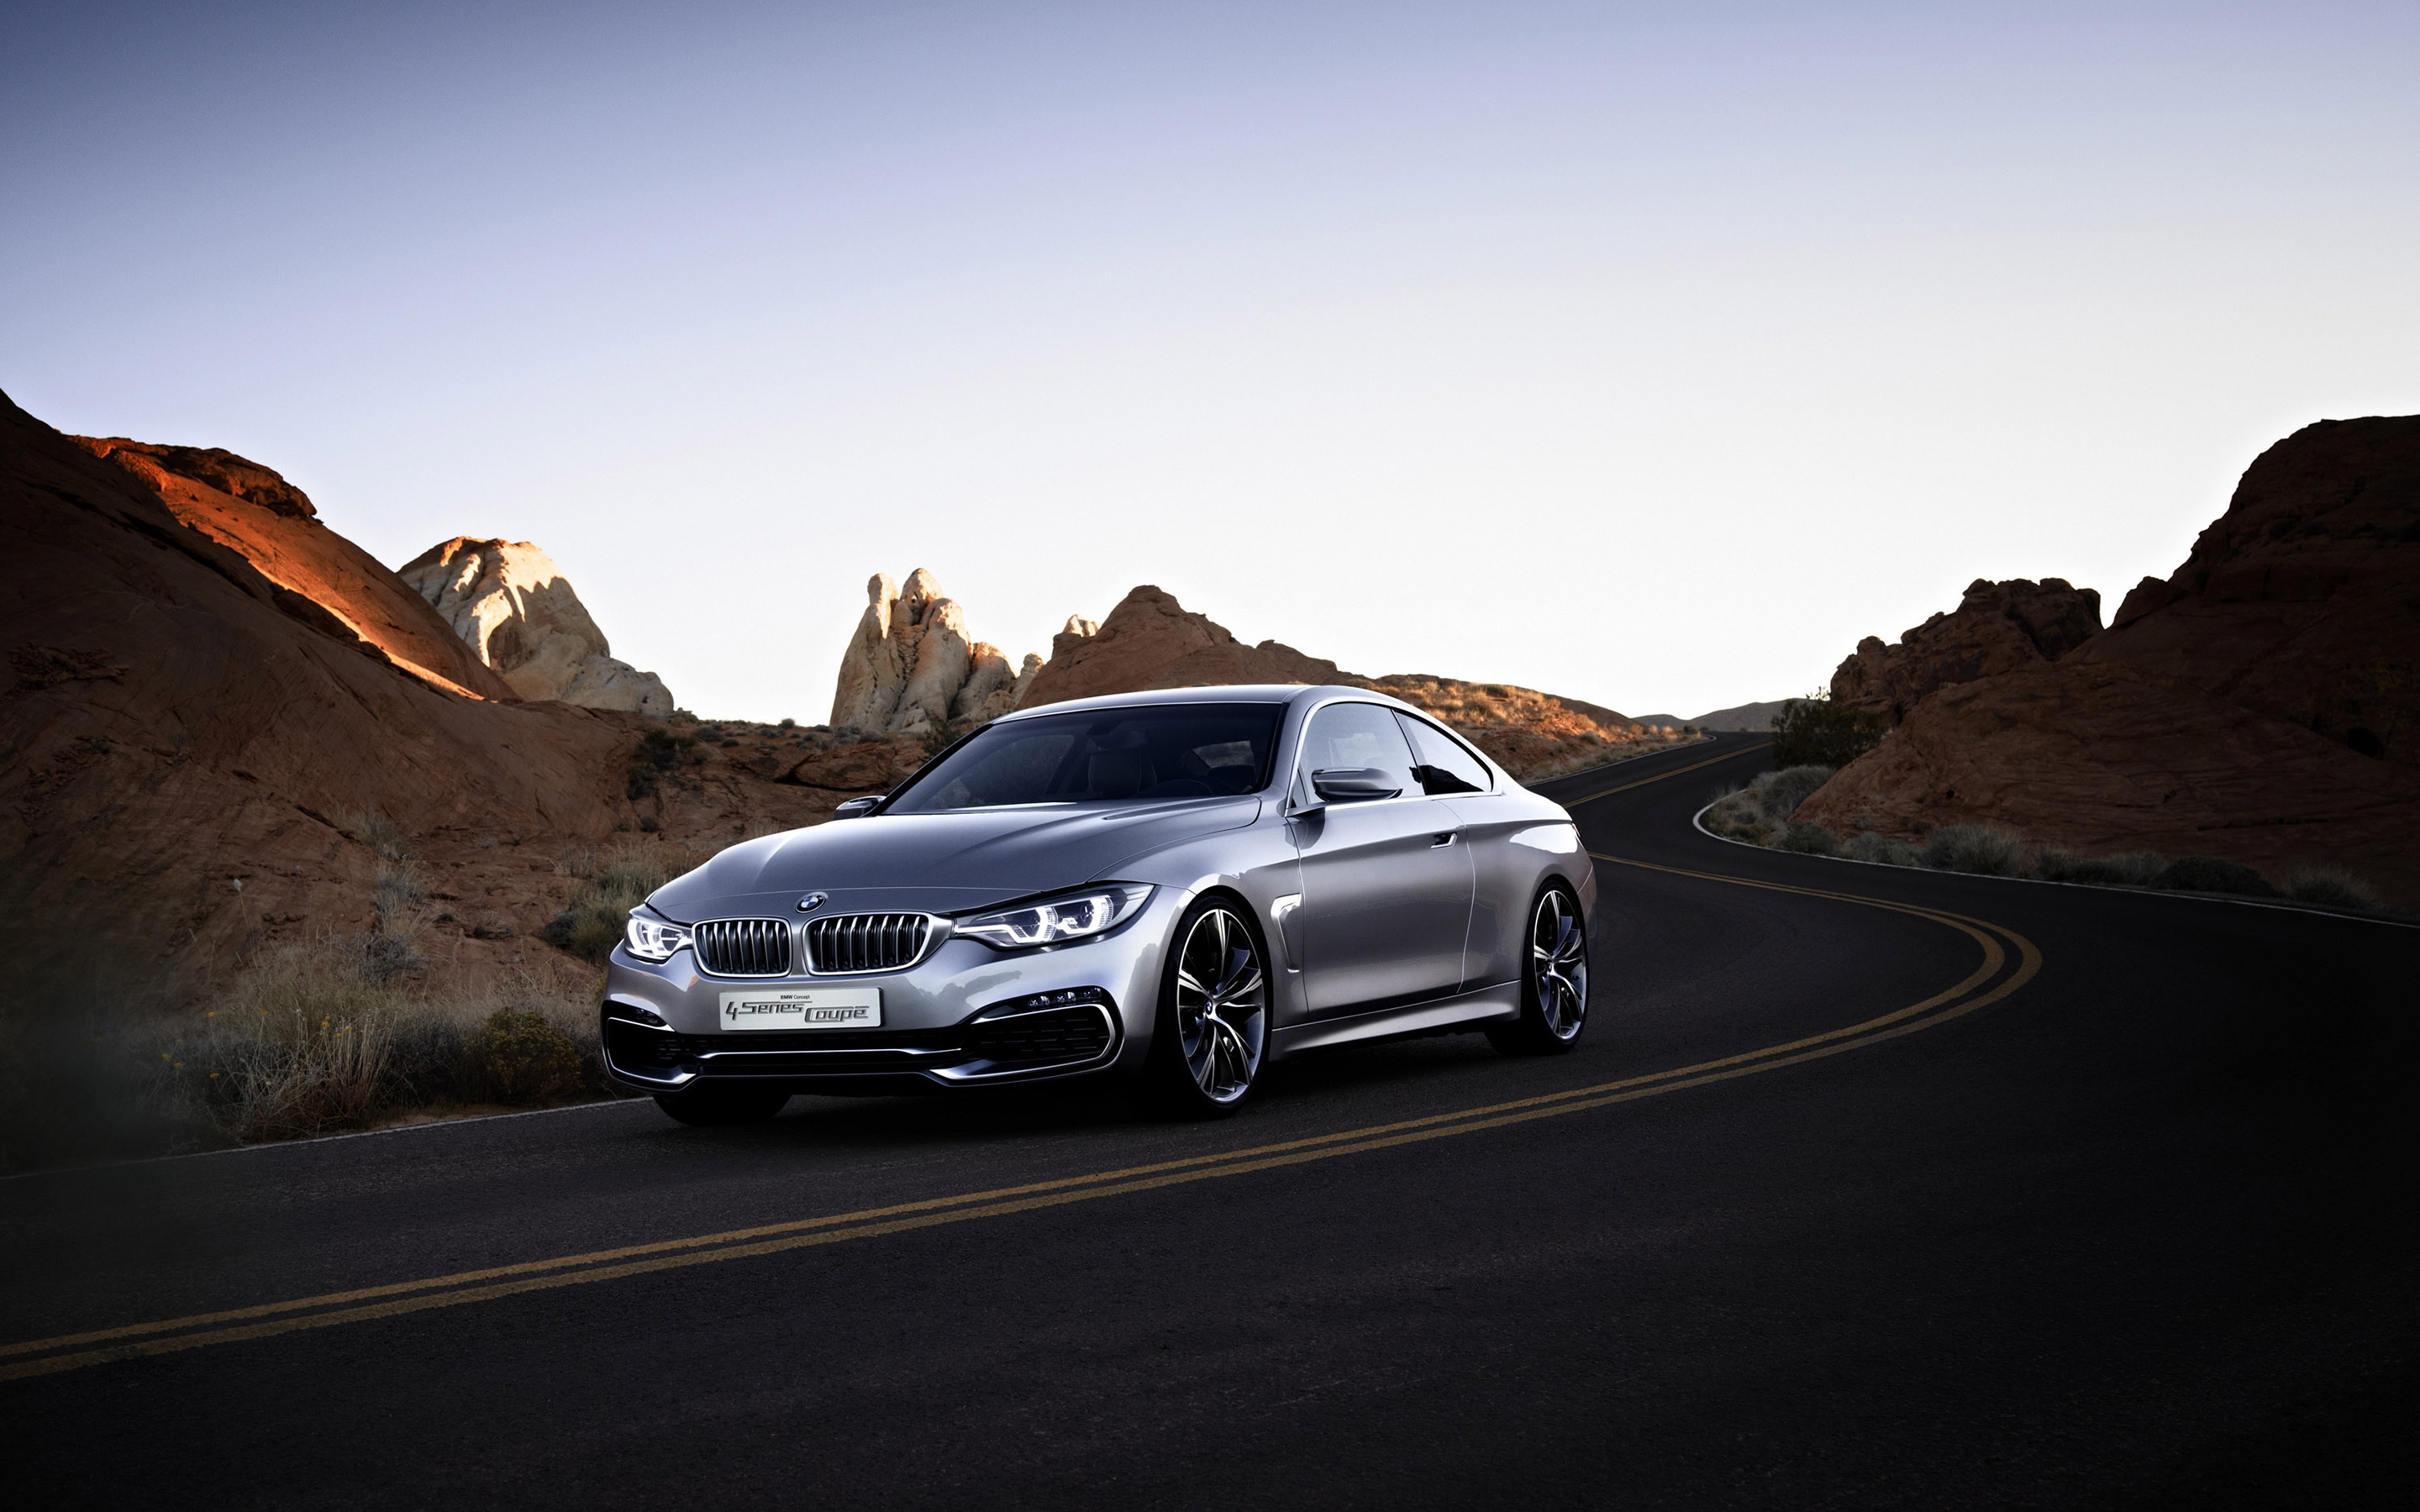 BMW 4 Series Coupe Concept for 2880 x 1800 Retina Display resolution